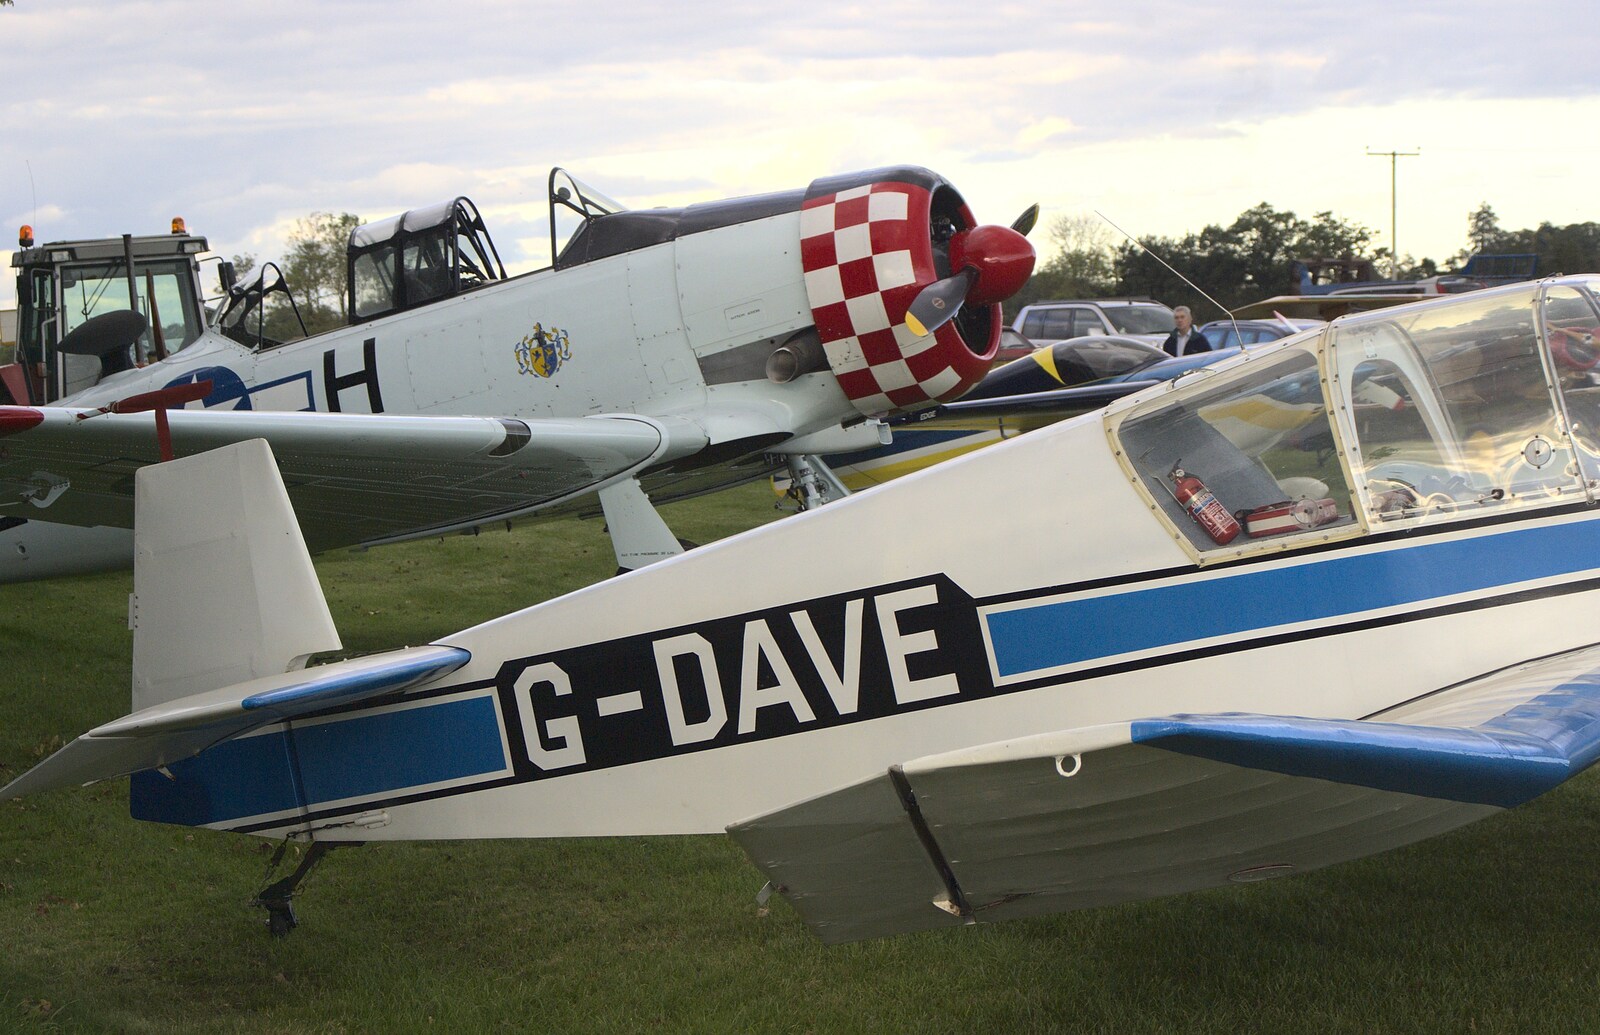 The cool registration of G-DAVE from Maurice Mustang's Open Day, Hardwick Airfield, Norfolk - 17th October 2010